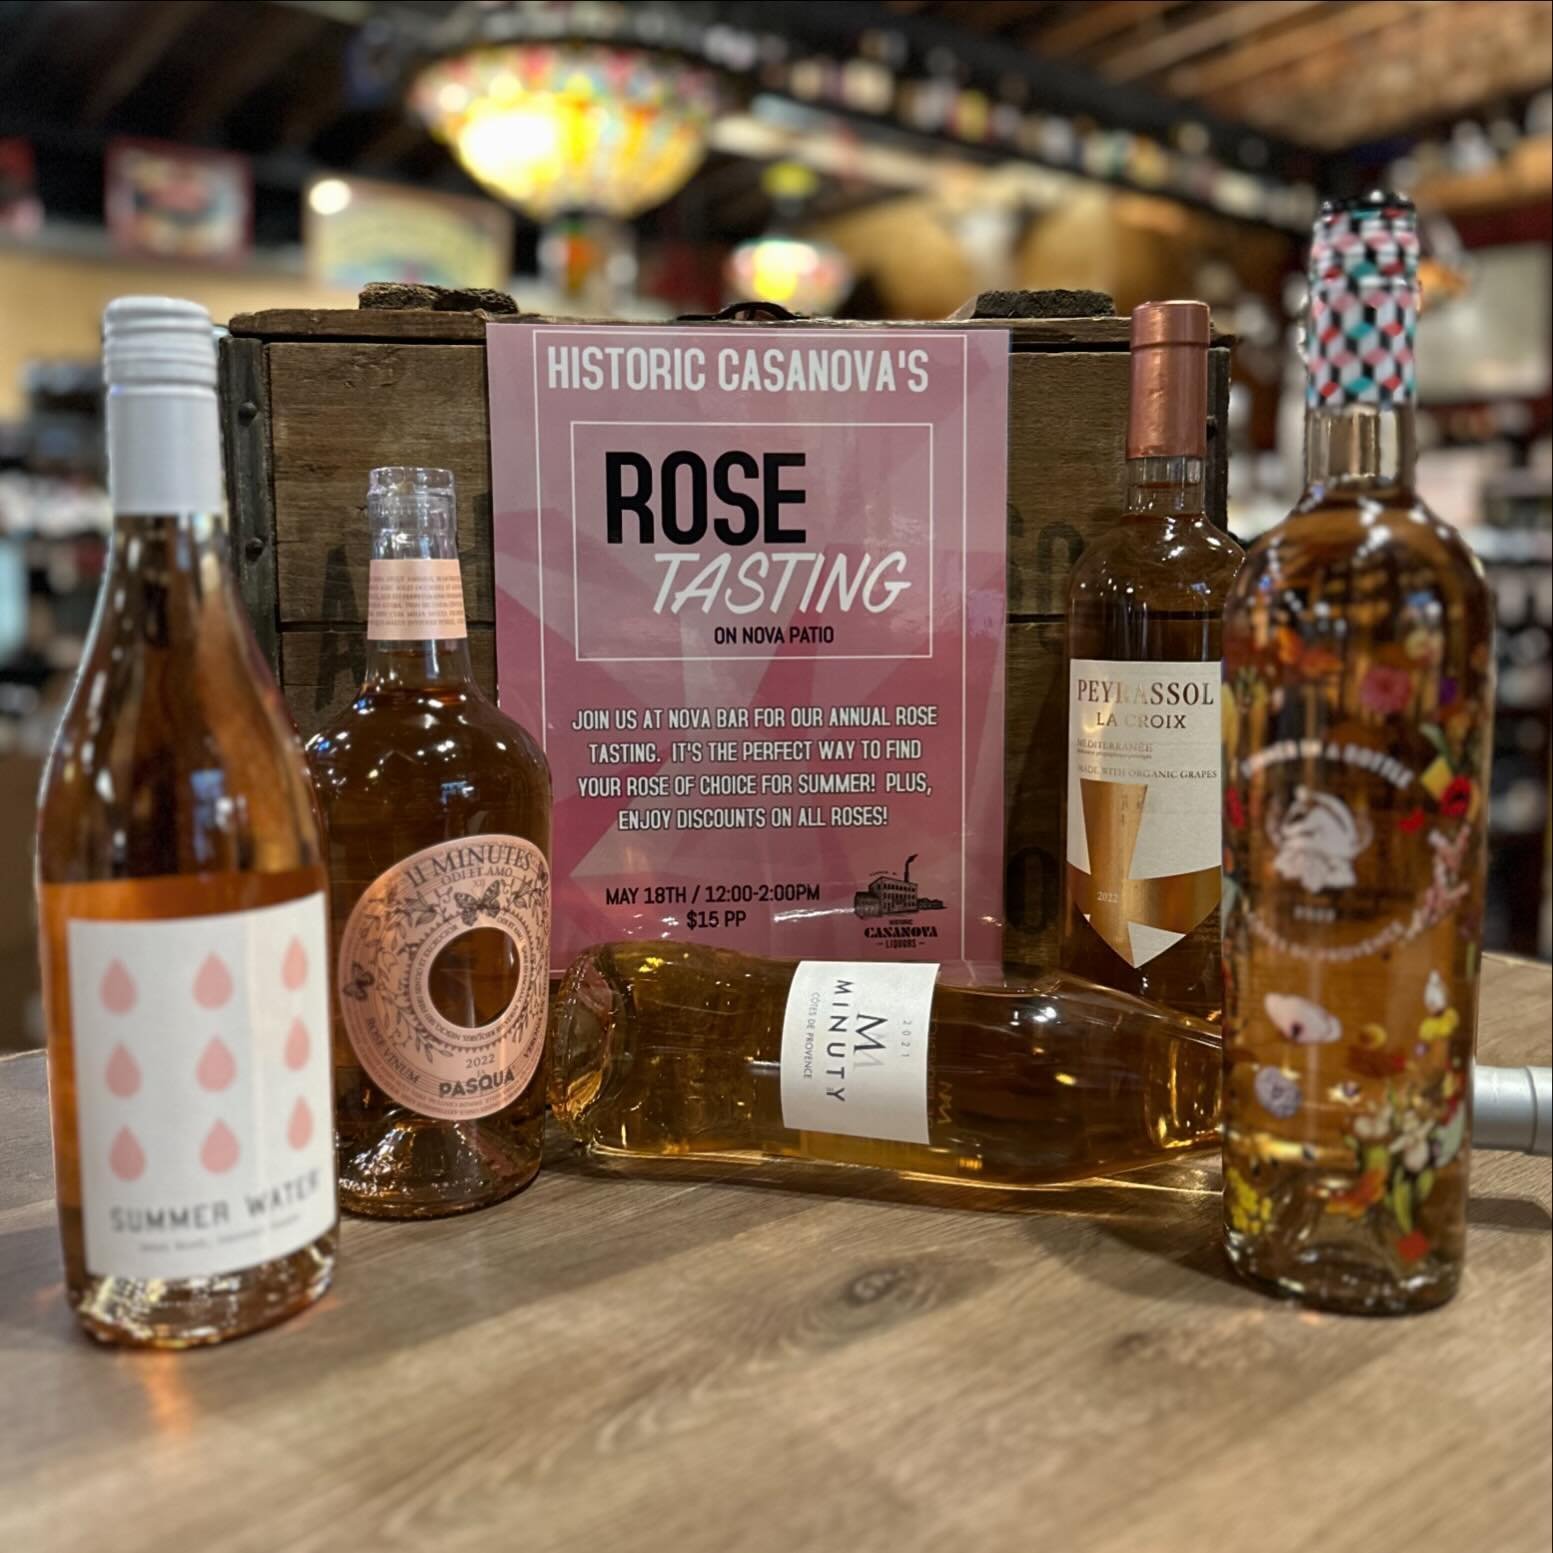 Rose Tasting - our annual Rose Wine tasting is coming up Saturday May 18th from 12-2pm on the Patio.

Tickets are $15pp and a great opportunity to test out all of the amazing roses that will be available this year. 

Grab a friend and come on down an